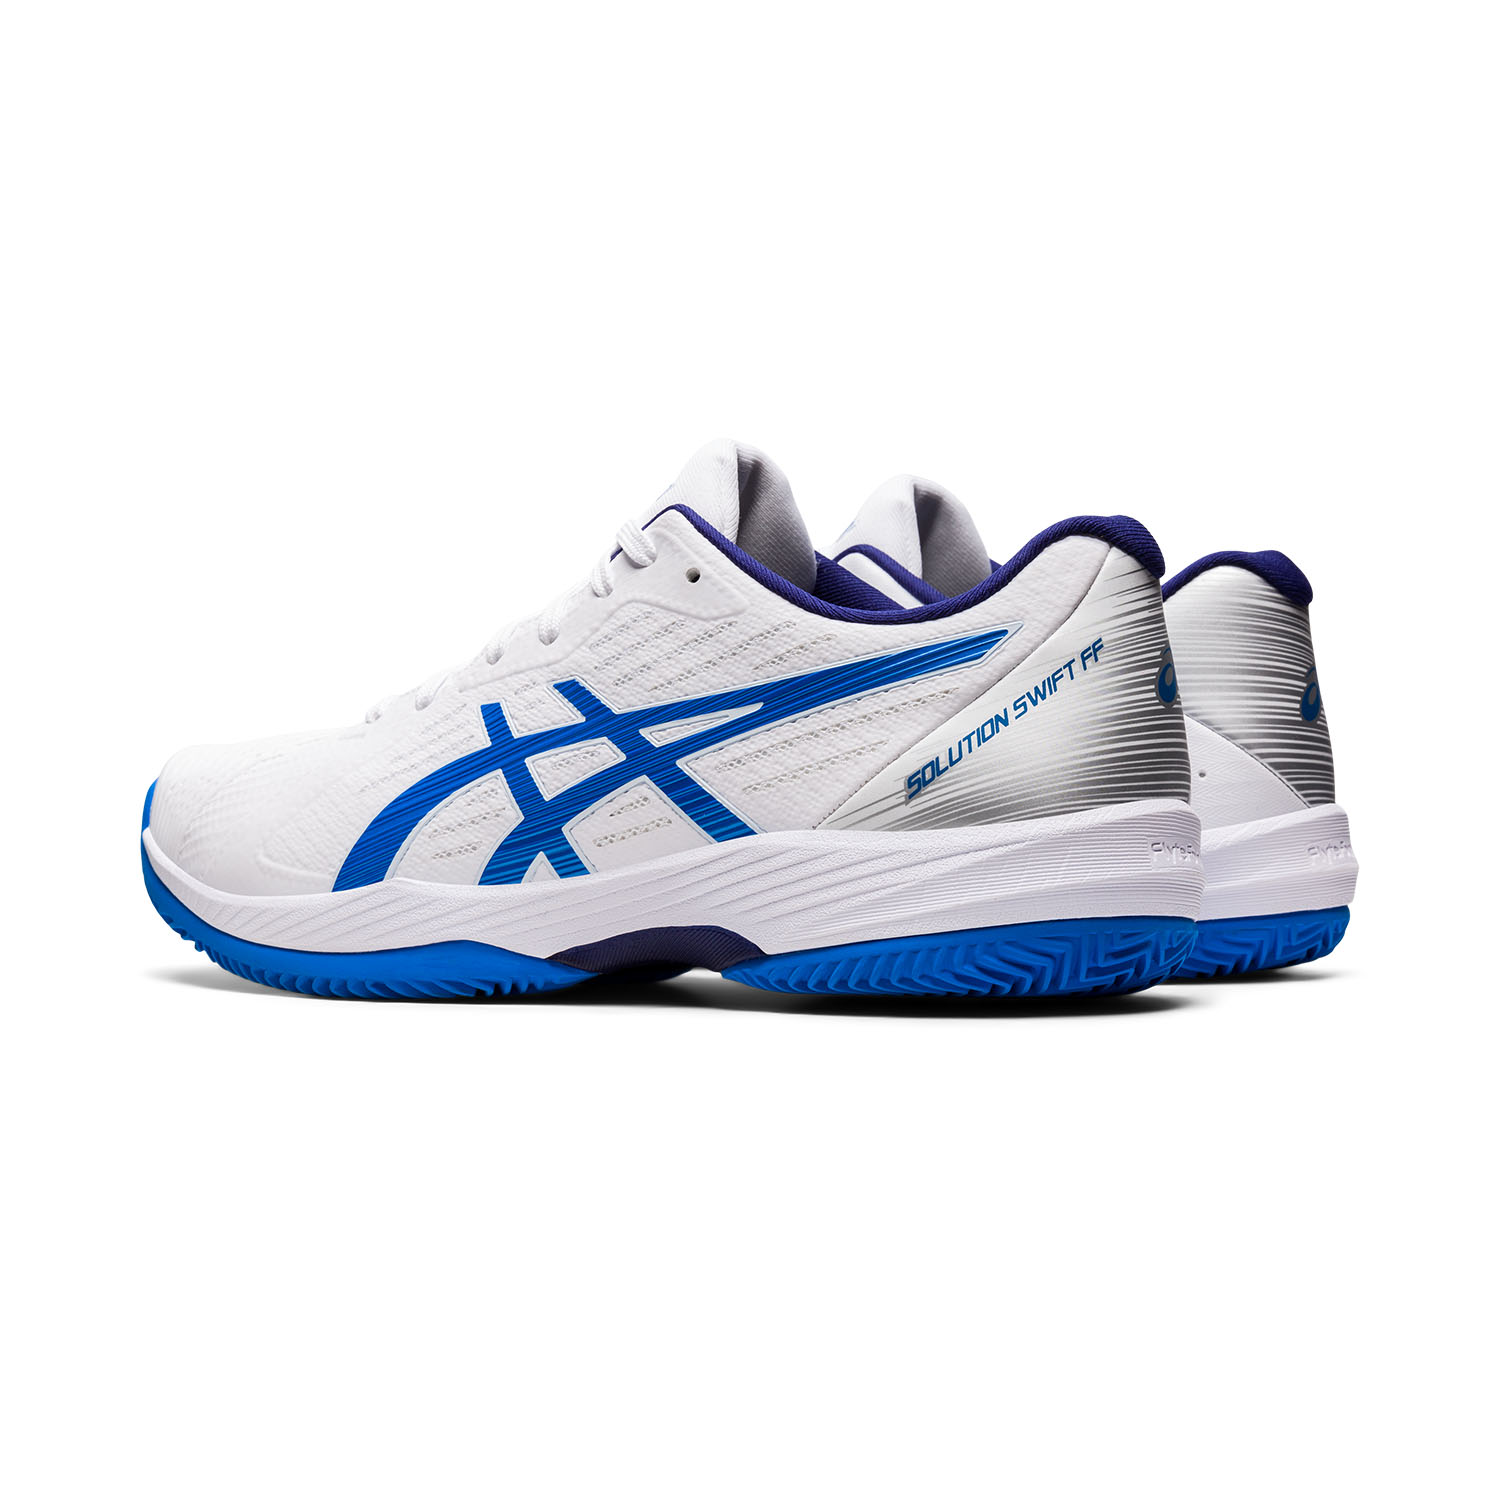 Asics Solution Swift FF Clay - White/Electric Blue